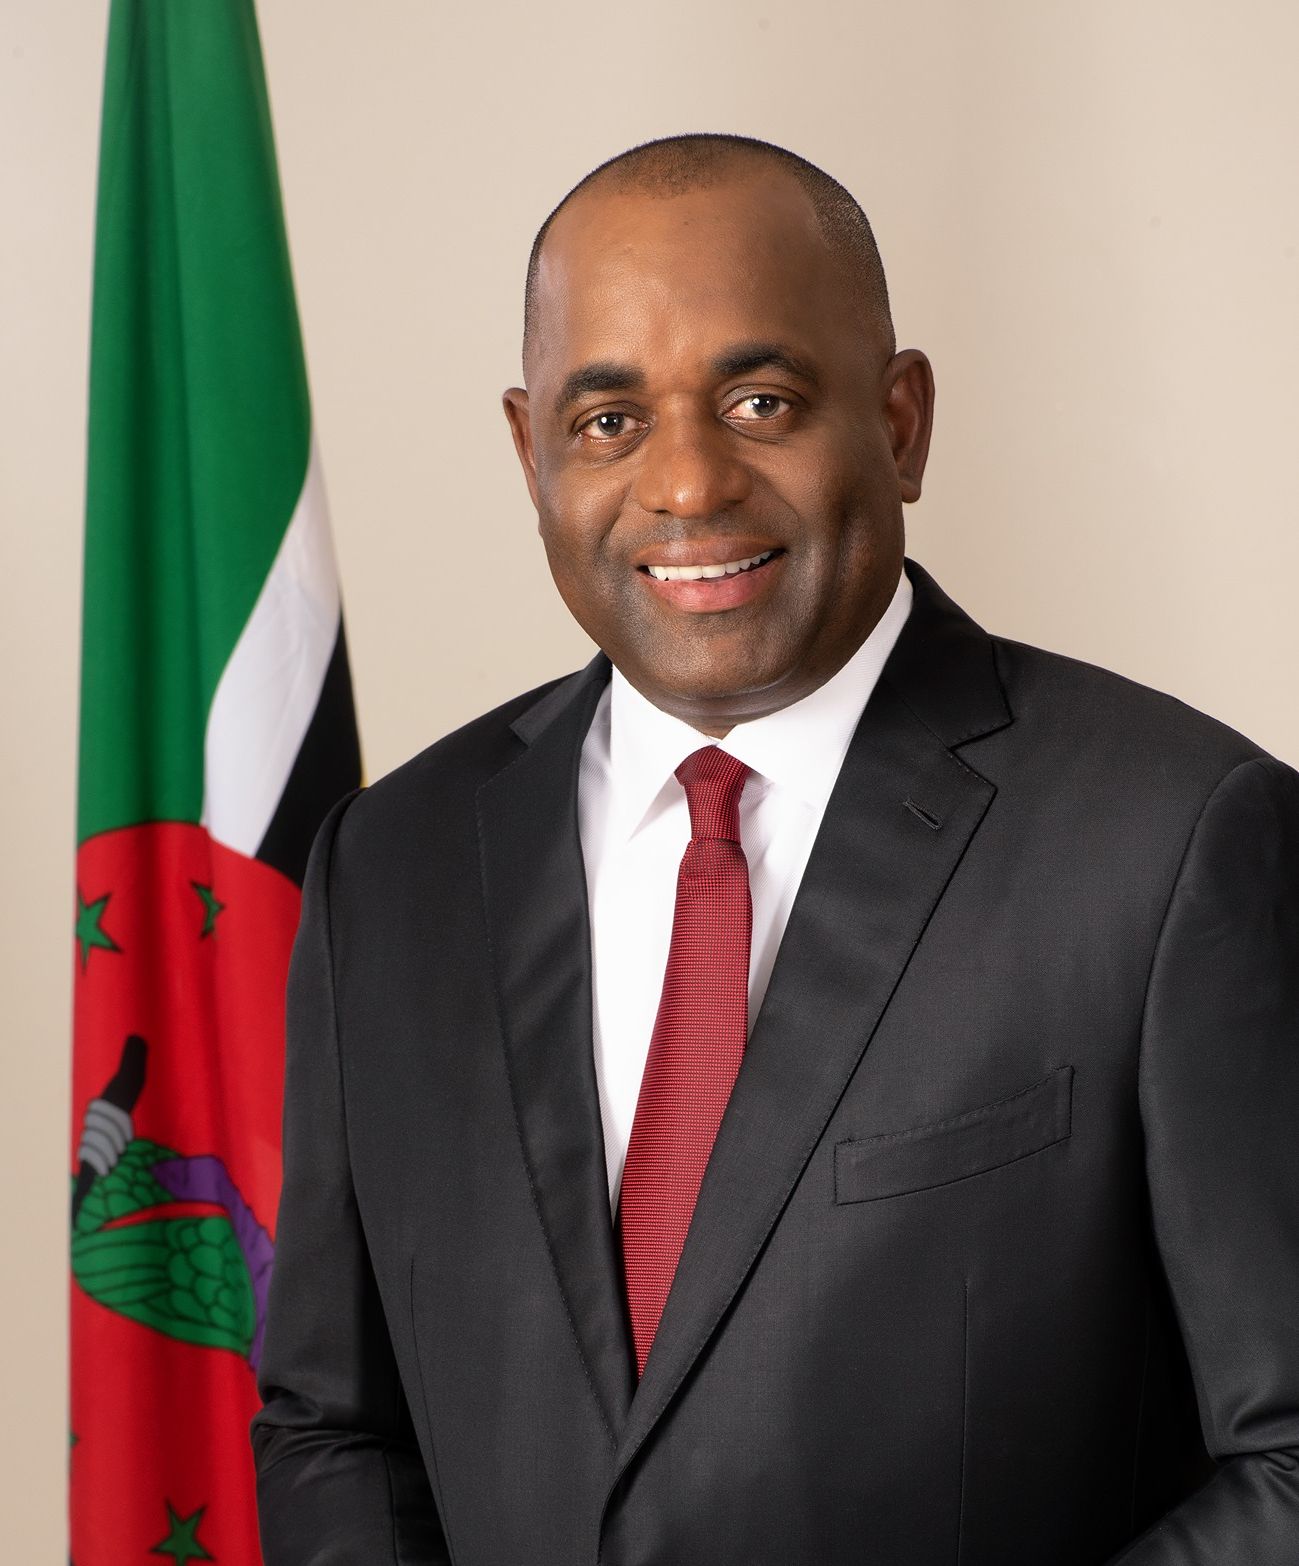 PRIME MINISTER ROOSEVELT SKERRIT TO RETURN FROM CANADA CARICOM SUMMIT AS TROPICAL STORM WATCH IS ISSUED FOR DOMINICA